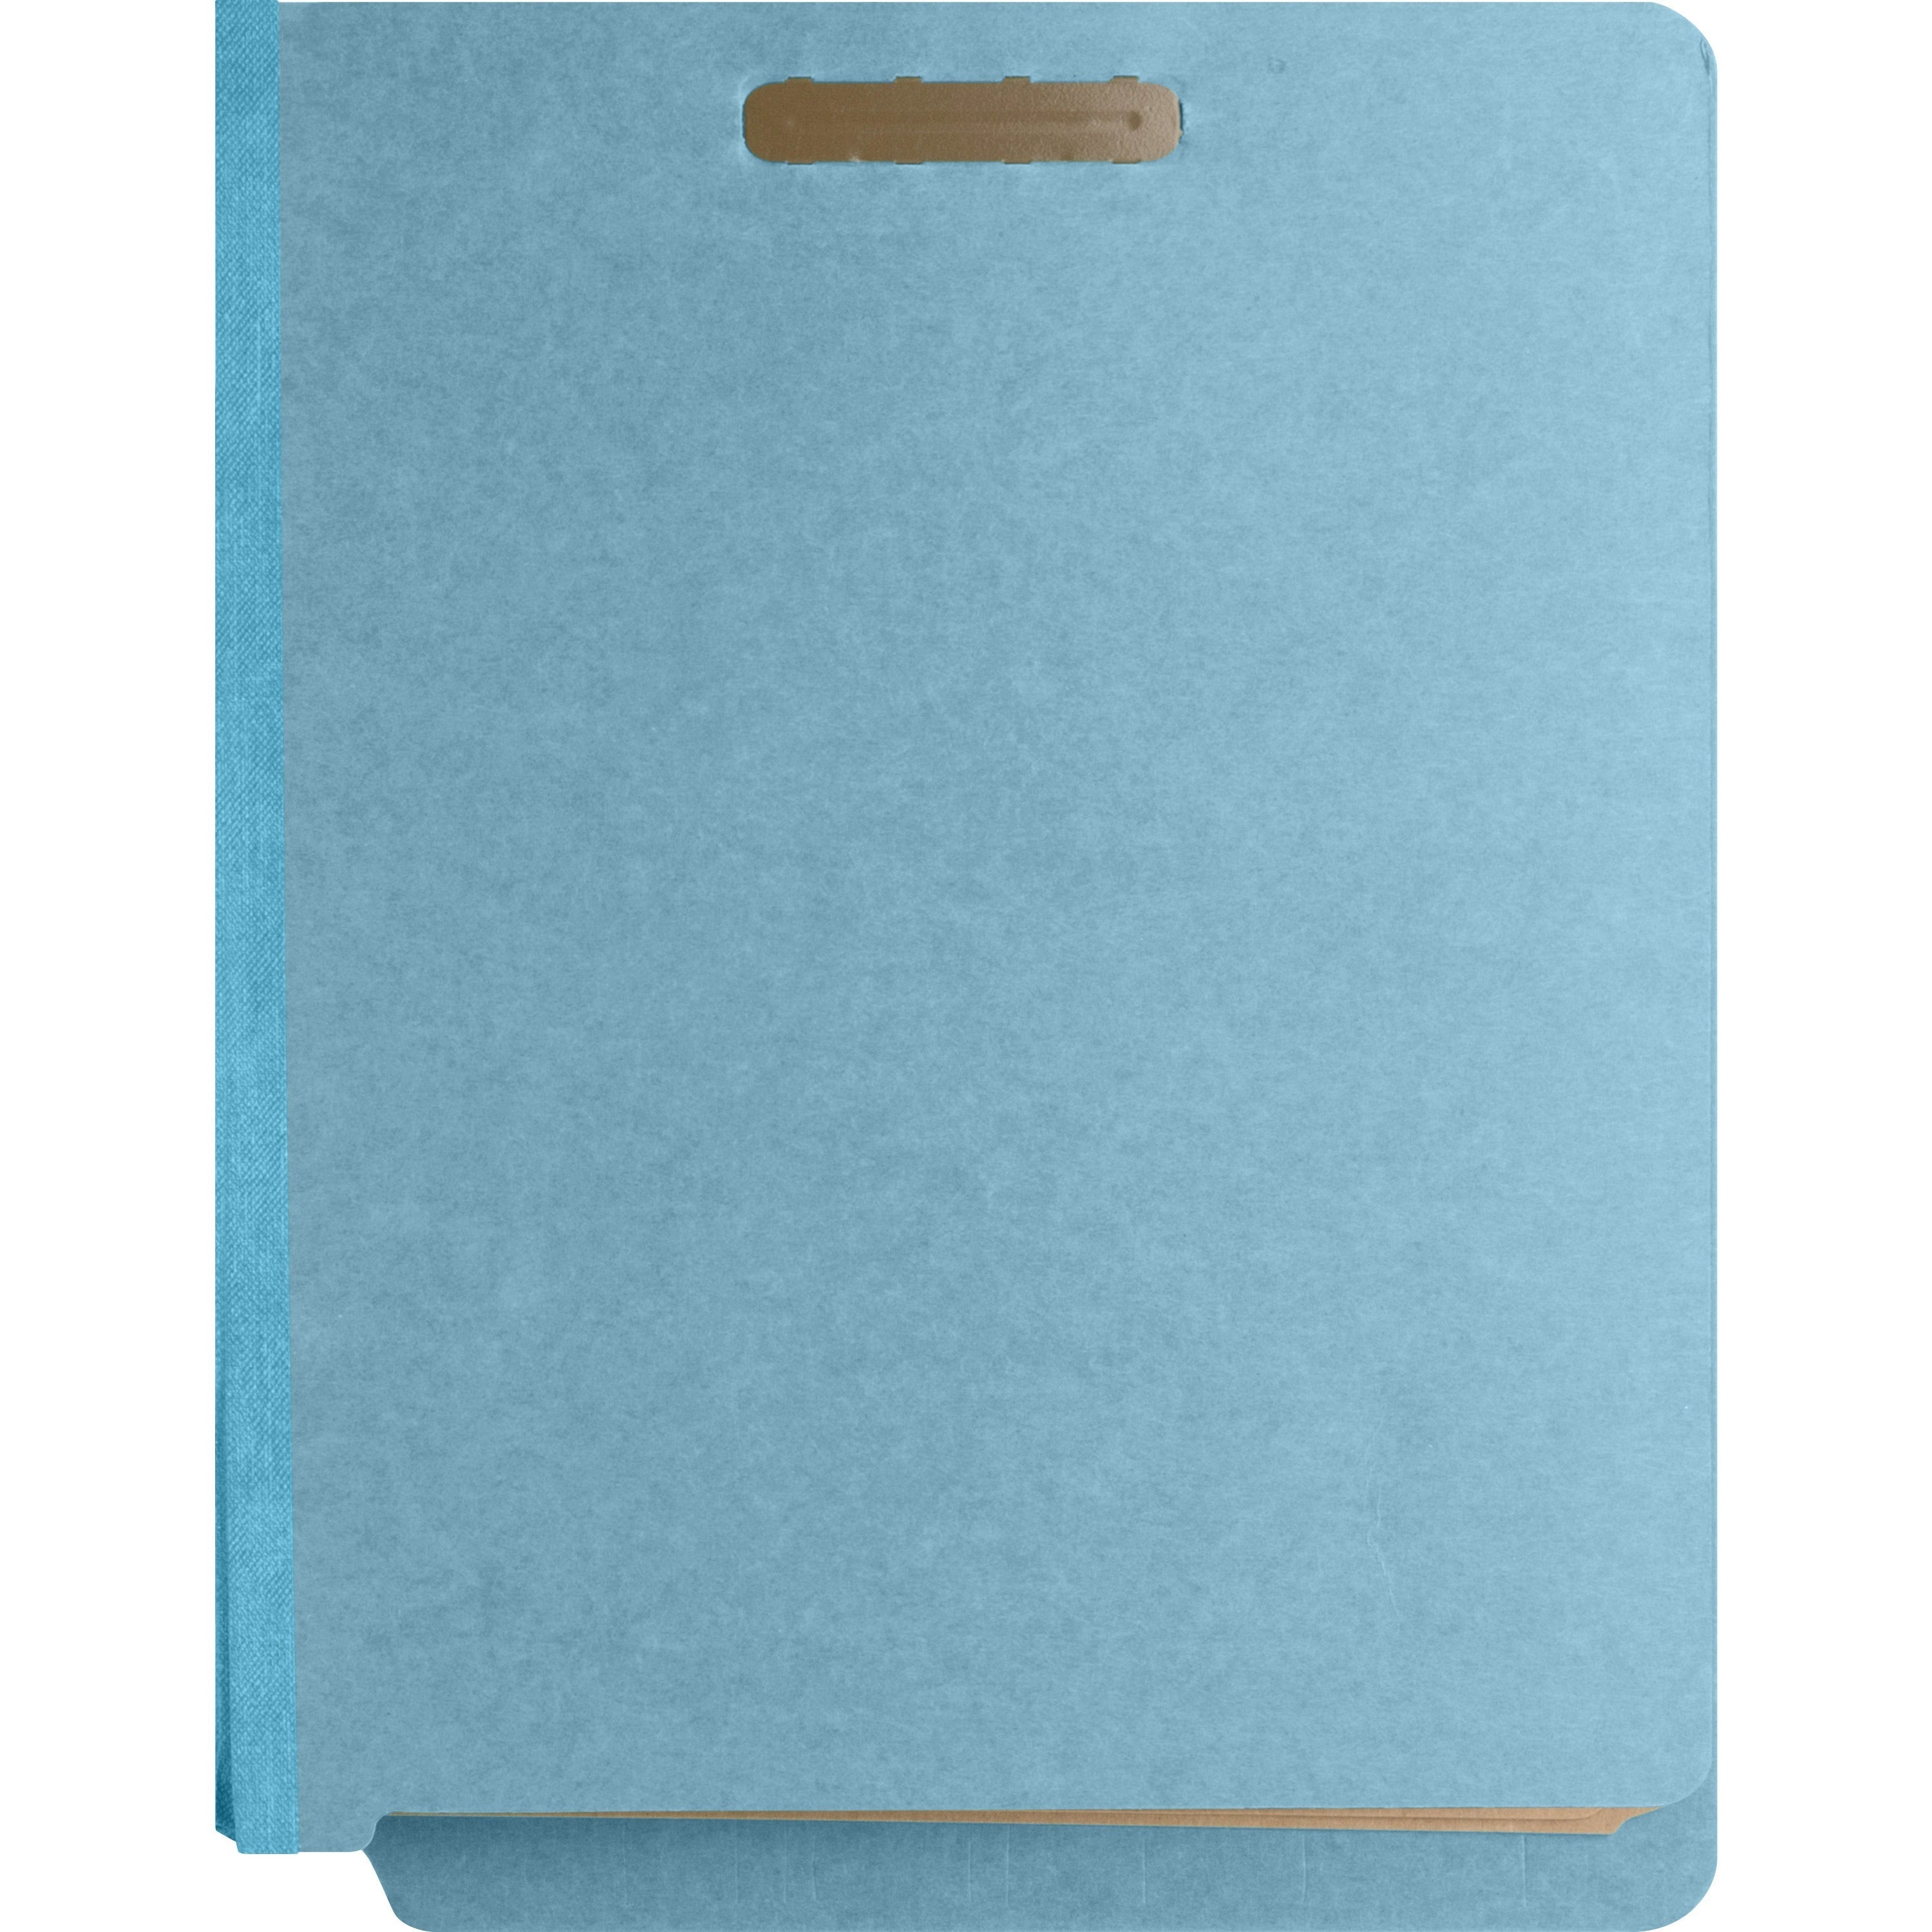 Nature Saver Letter Recycled Classification Folder - 8 1/2" x 11" - End Tab Location - 2 Divider(s) - Fiberboard - Blue - 100% Recycled - 10 / Box - 